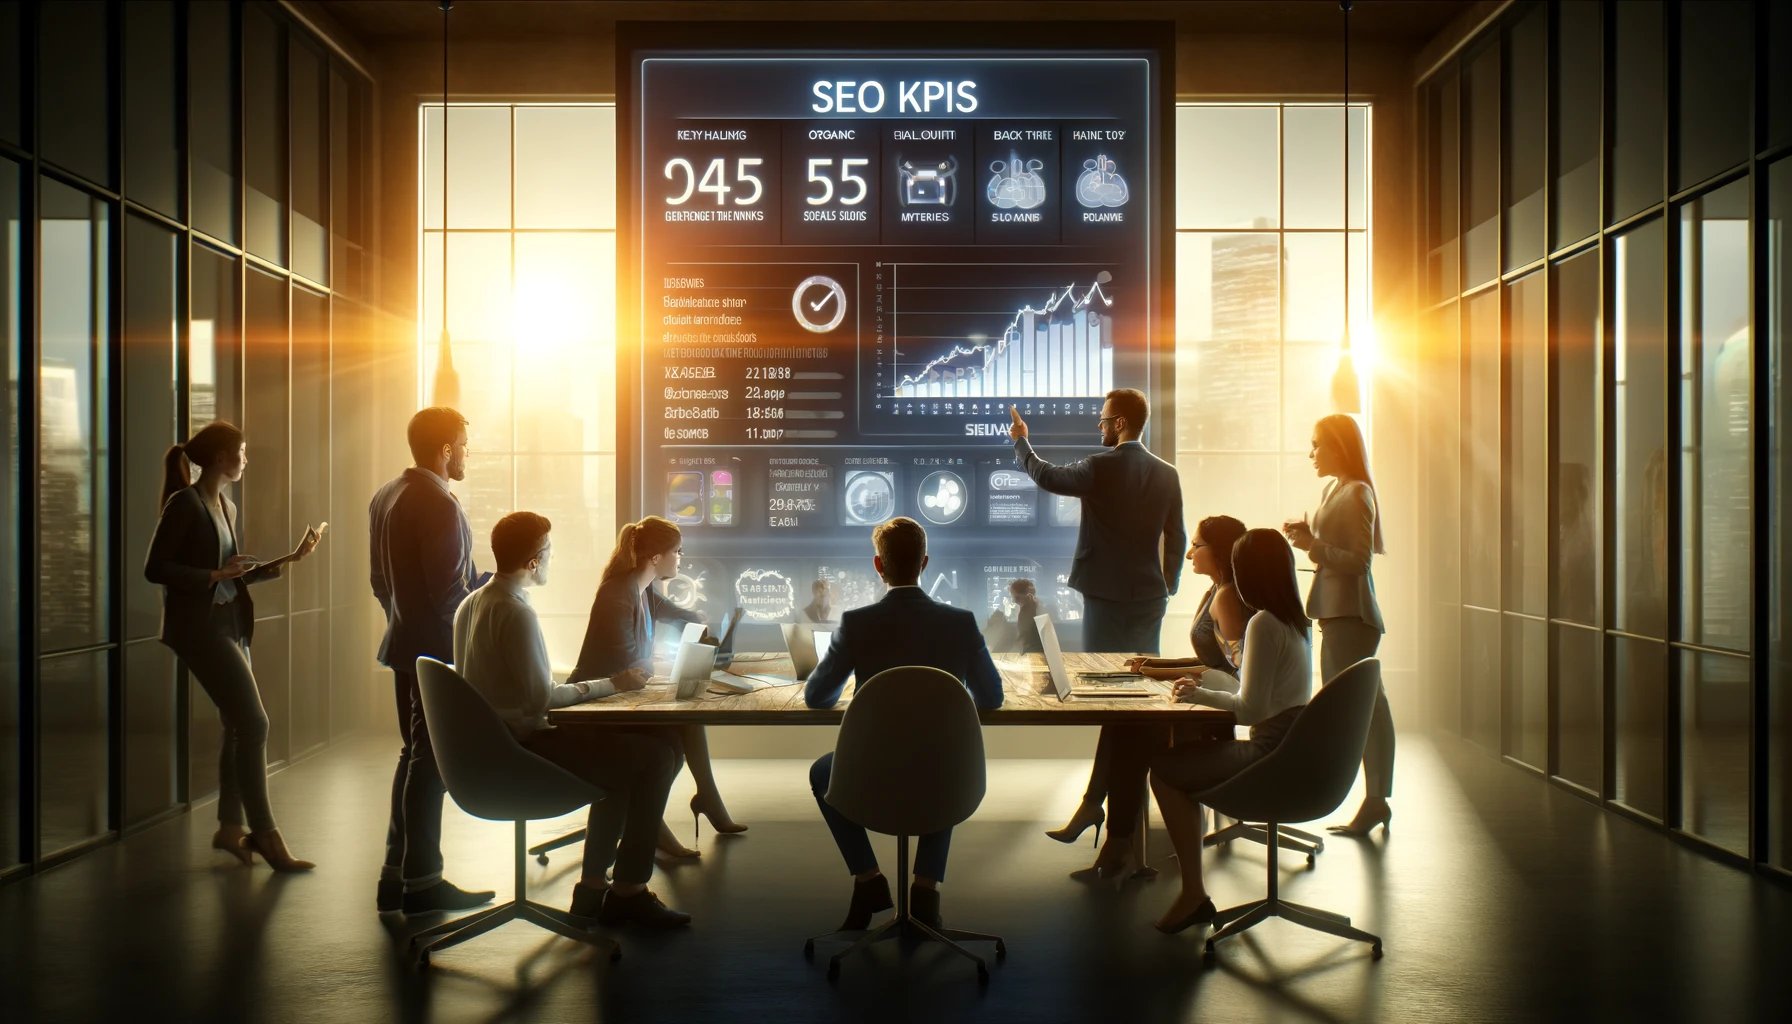 DALL·E 2024-04-11 12.06.19 - For the SEO KPIs image, envision an office space illuminated by soft, natural light. A large, sleek monitor on the wall displays detailed SEO metrics 